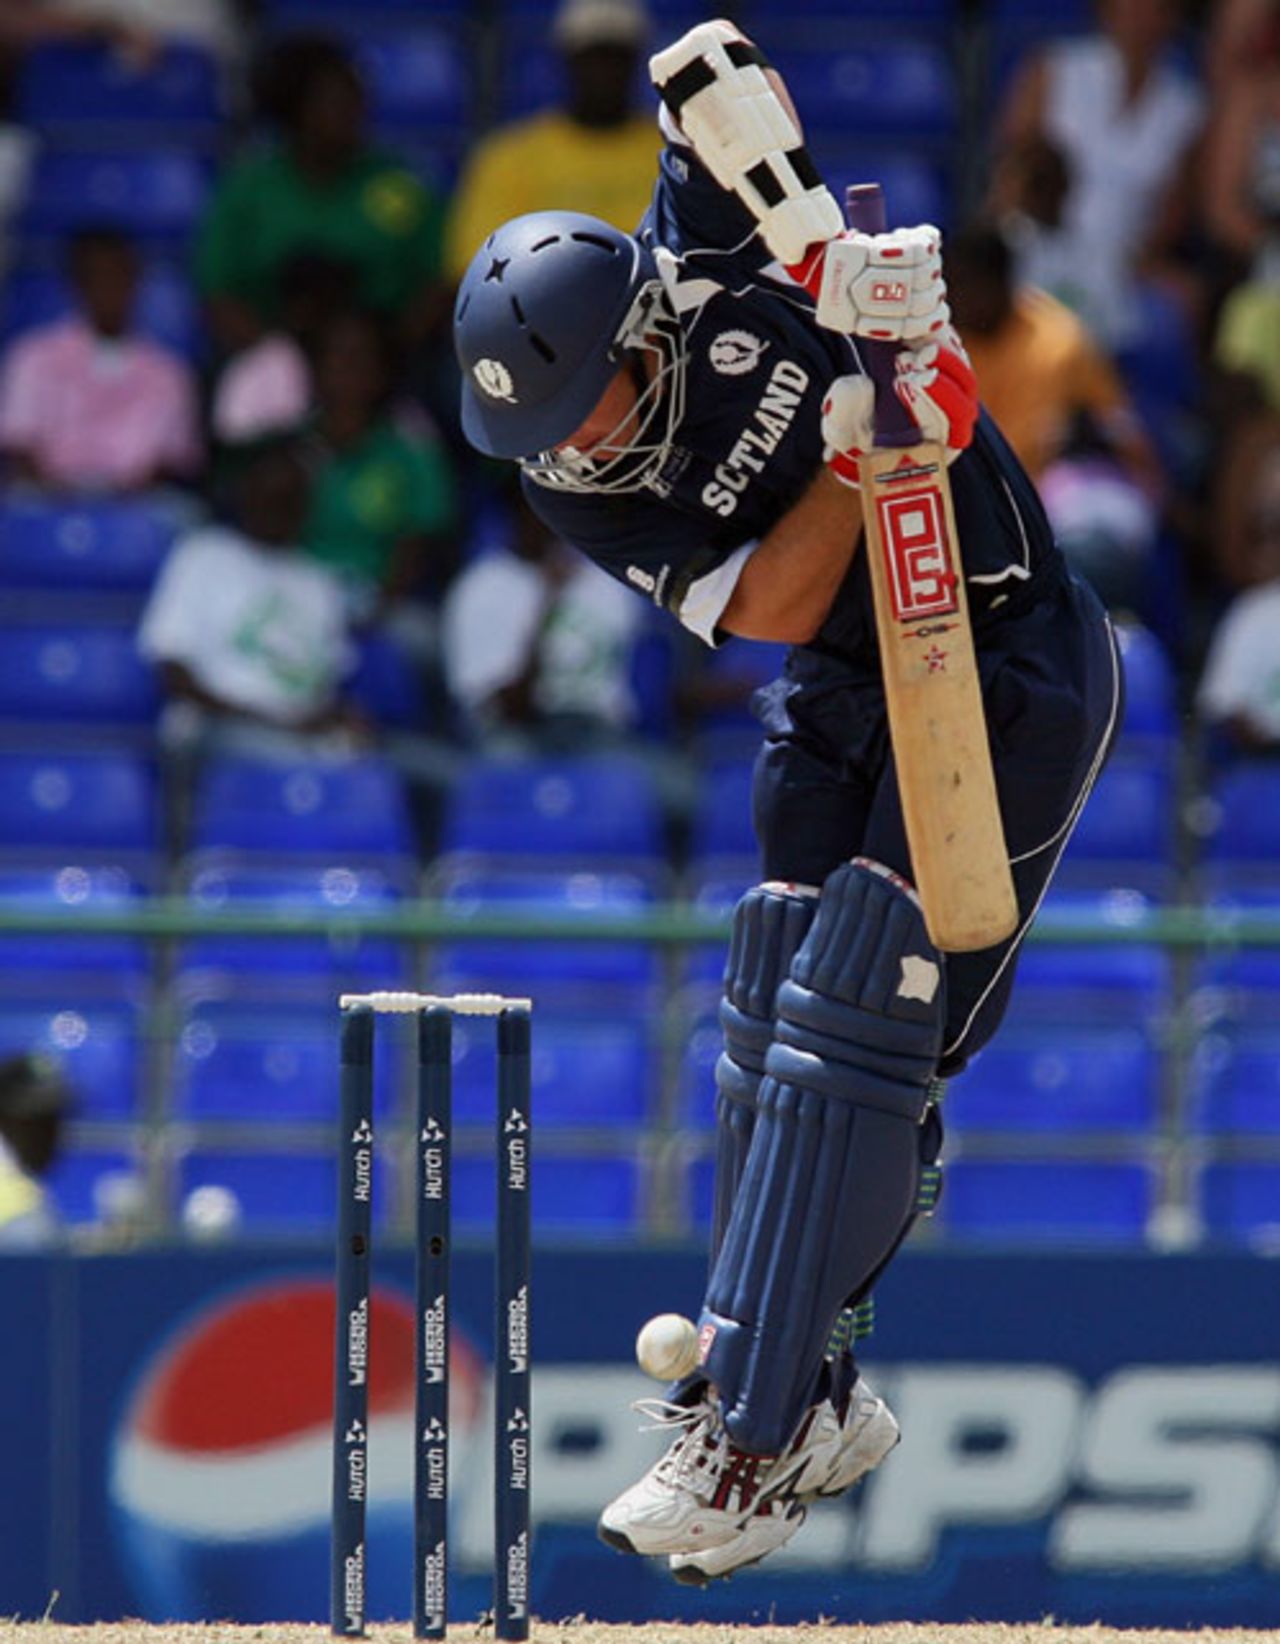 Dougie Brown leaps in the air to keep one out, Scotland v South Africa, Group A, St Kitts, March 20, 2007